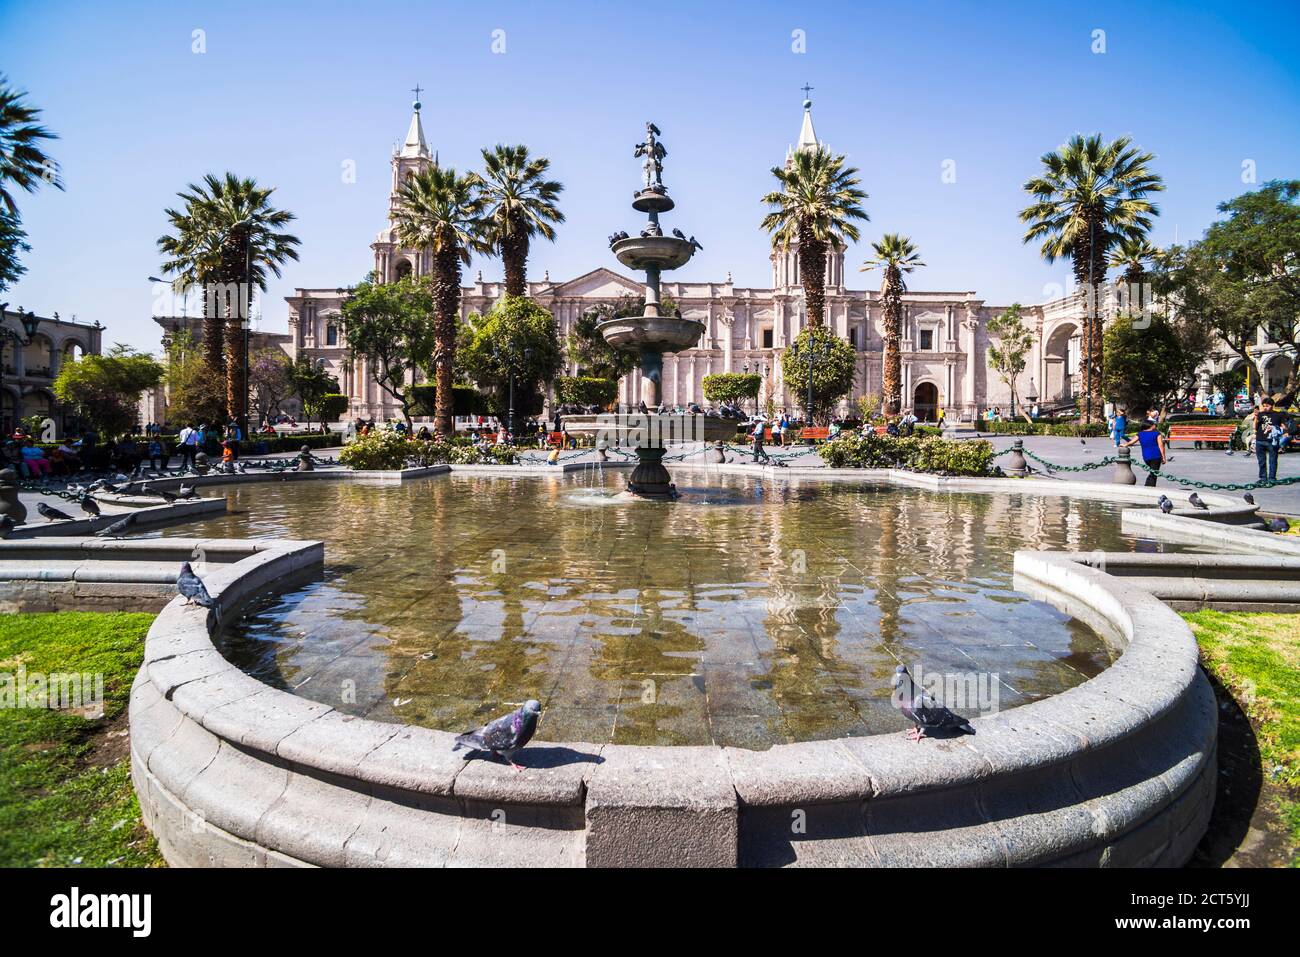 Plaza de Armas fountain and Basilica Cathedral of Arequipa, Arequipa, Peru, South America Stock Photo